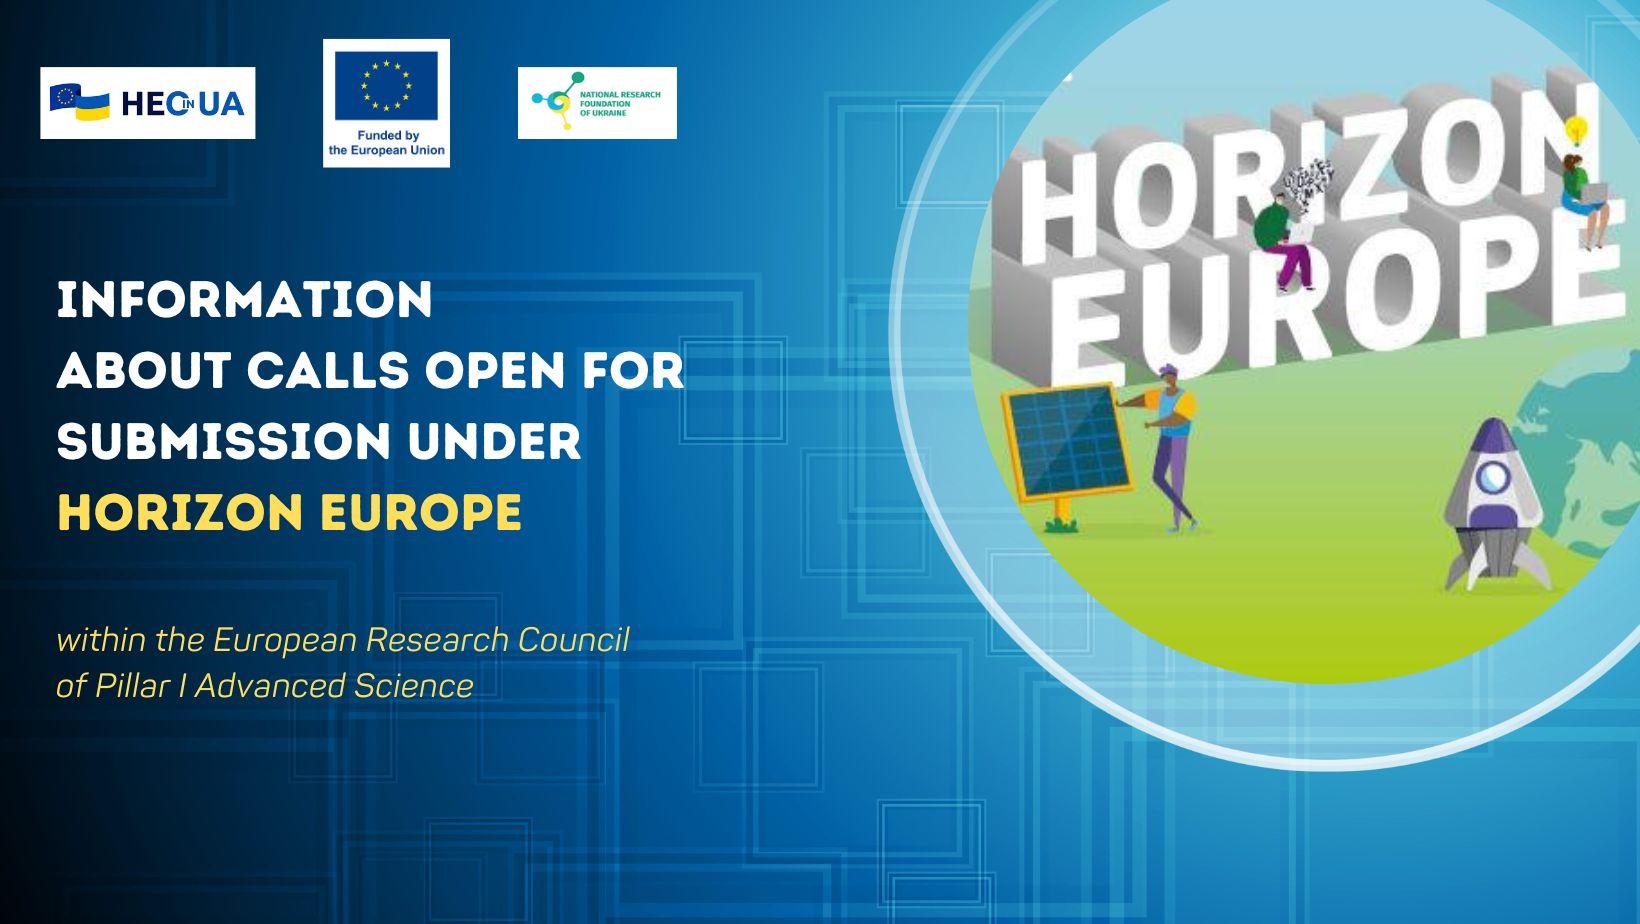 Information about calls open for submission within the European Research Council